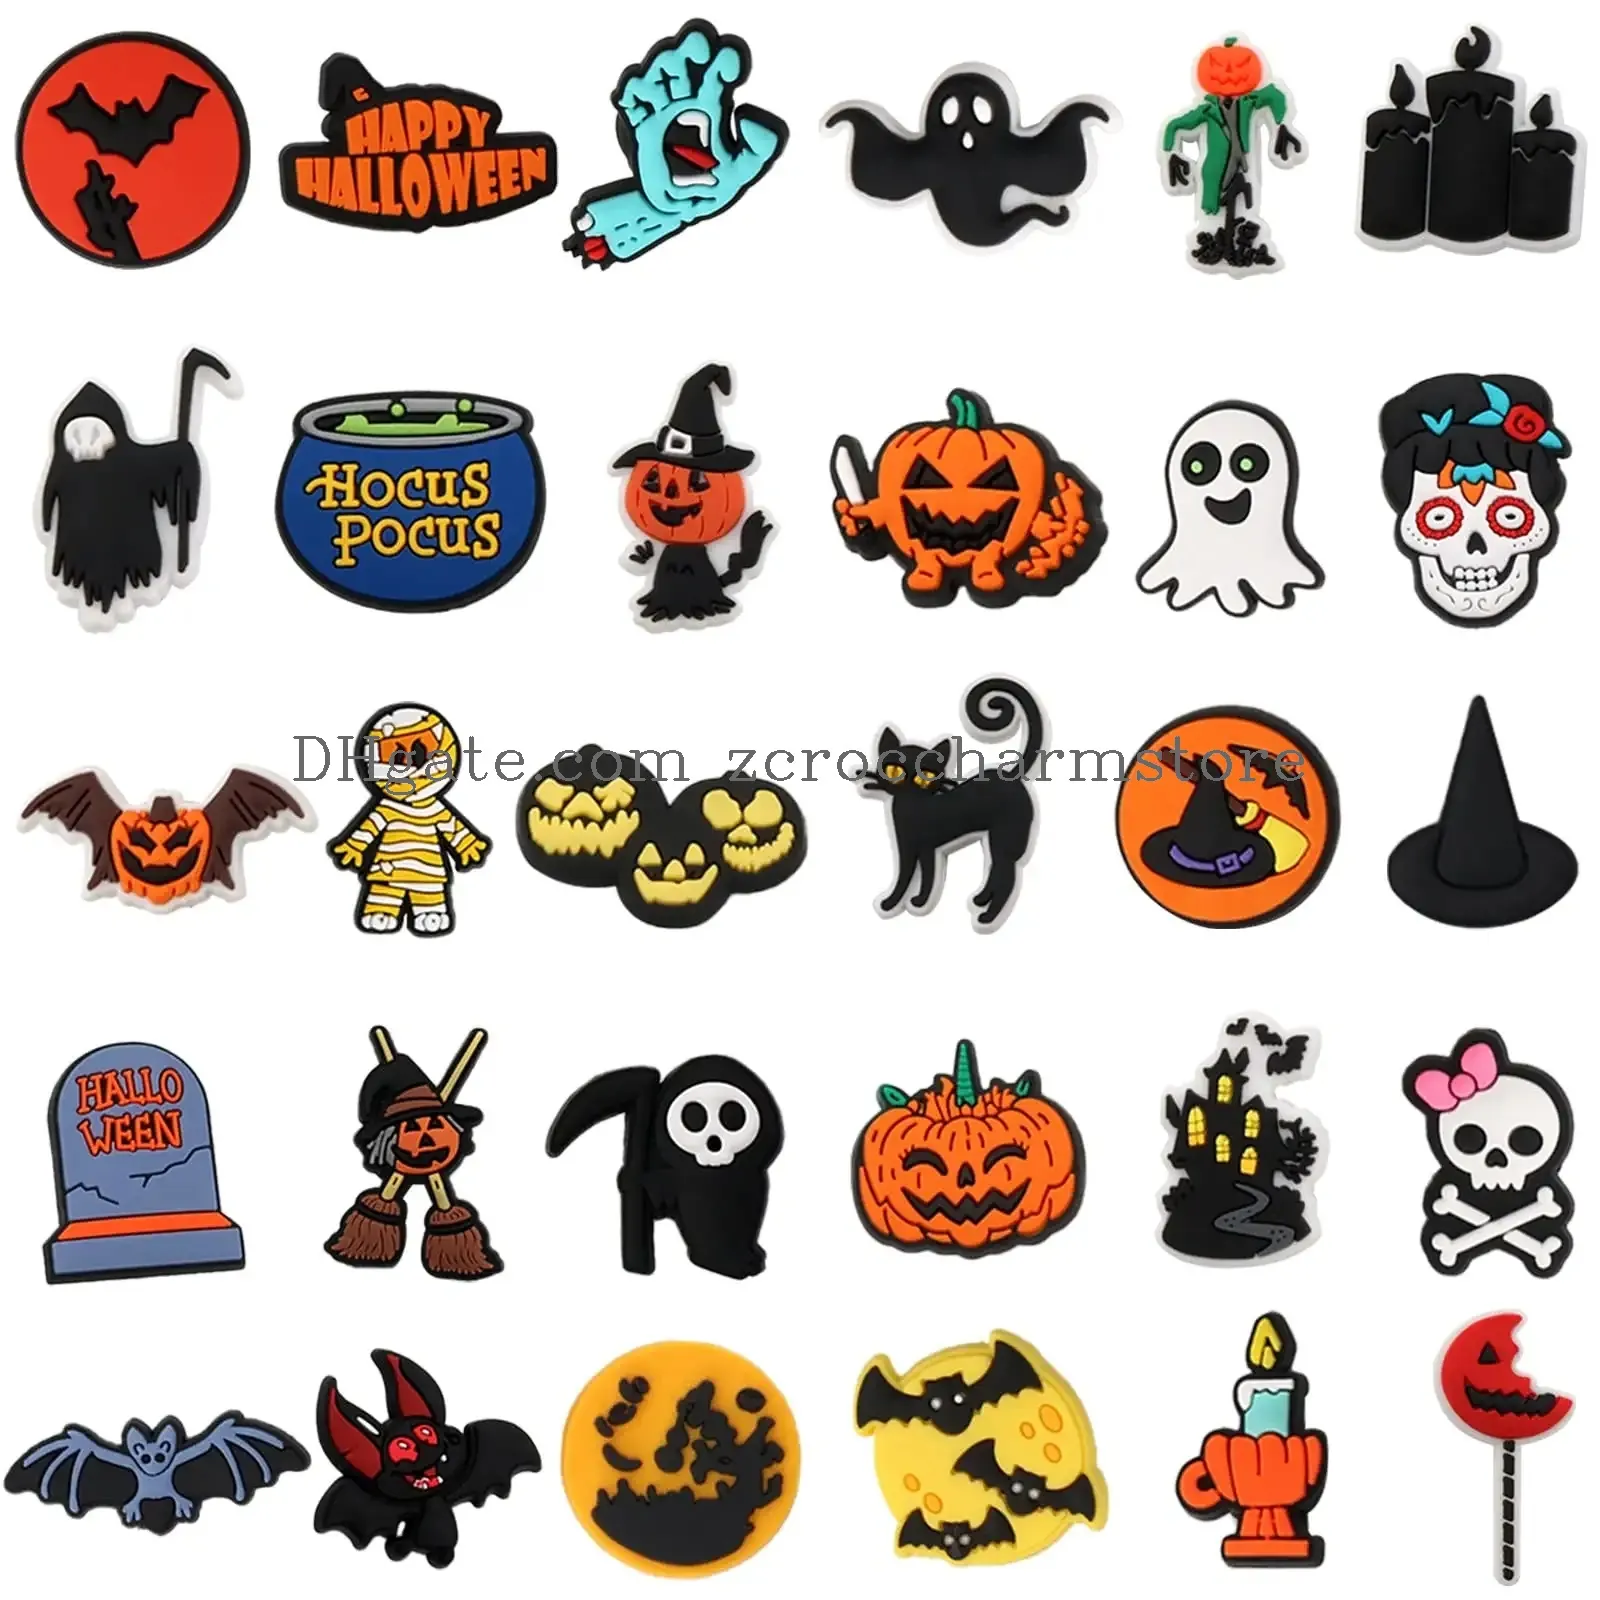 3ml halloween charms fits for clog sandals shoes decoration witch accessories for adult men women party favor gifts